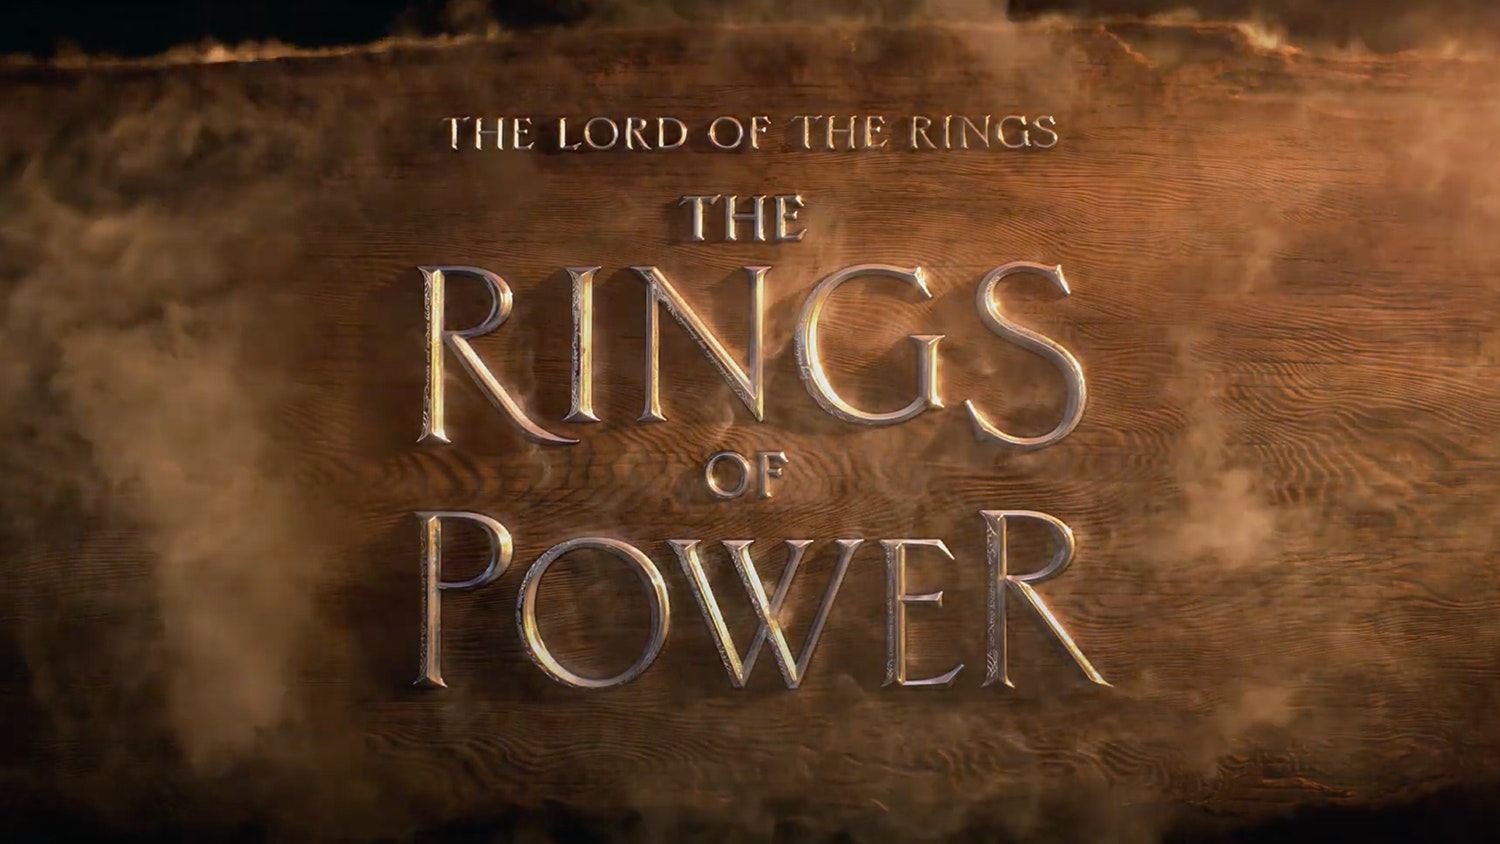 s Lord Of The Rings Series Officially Titled The Rings Of Power